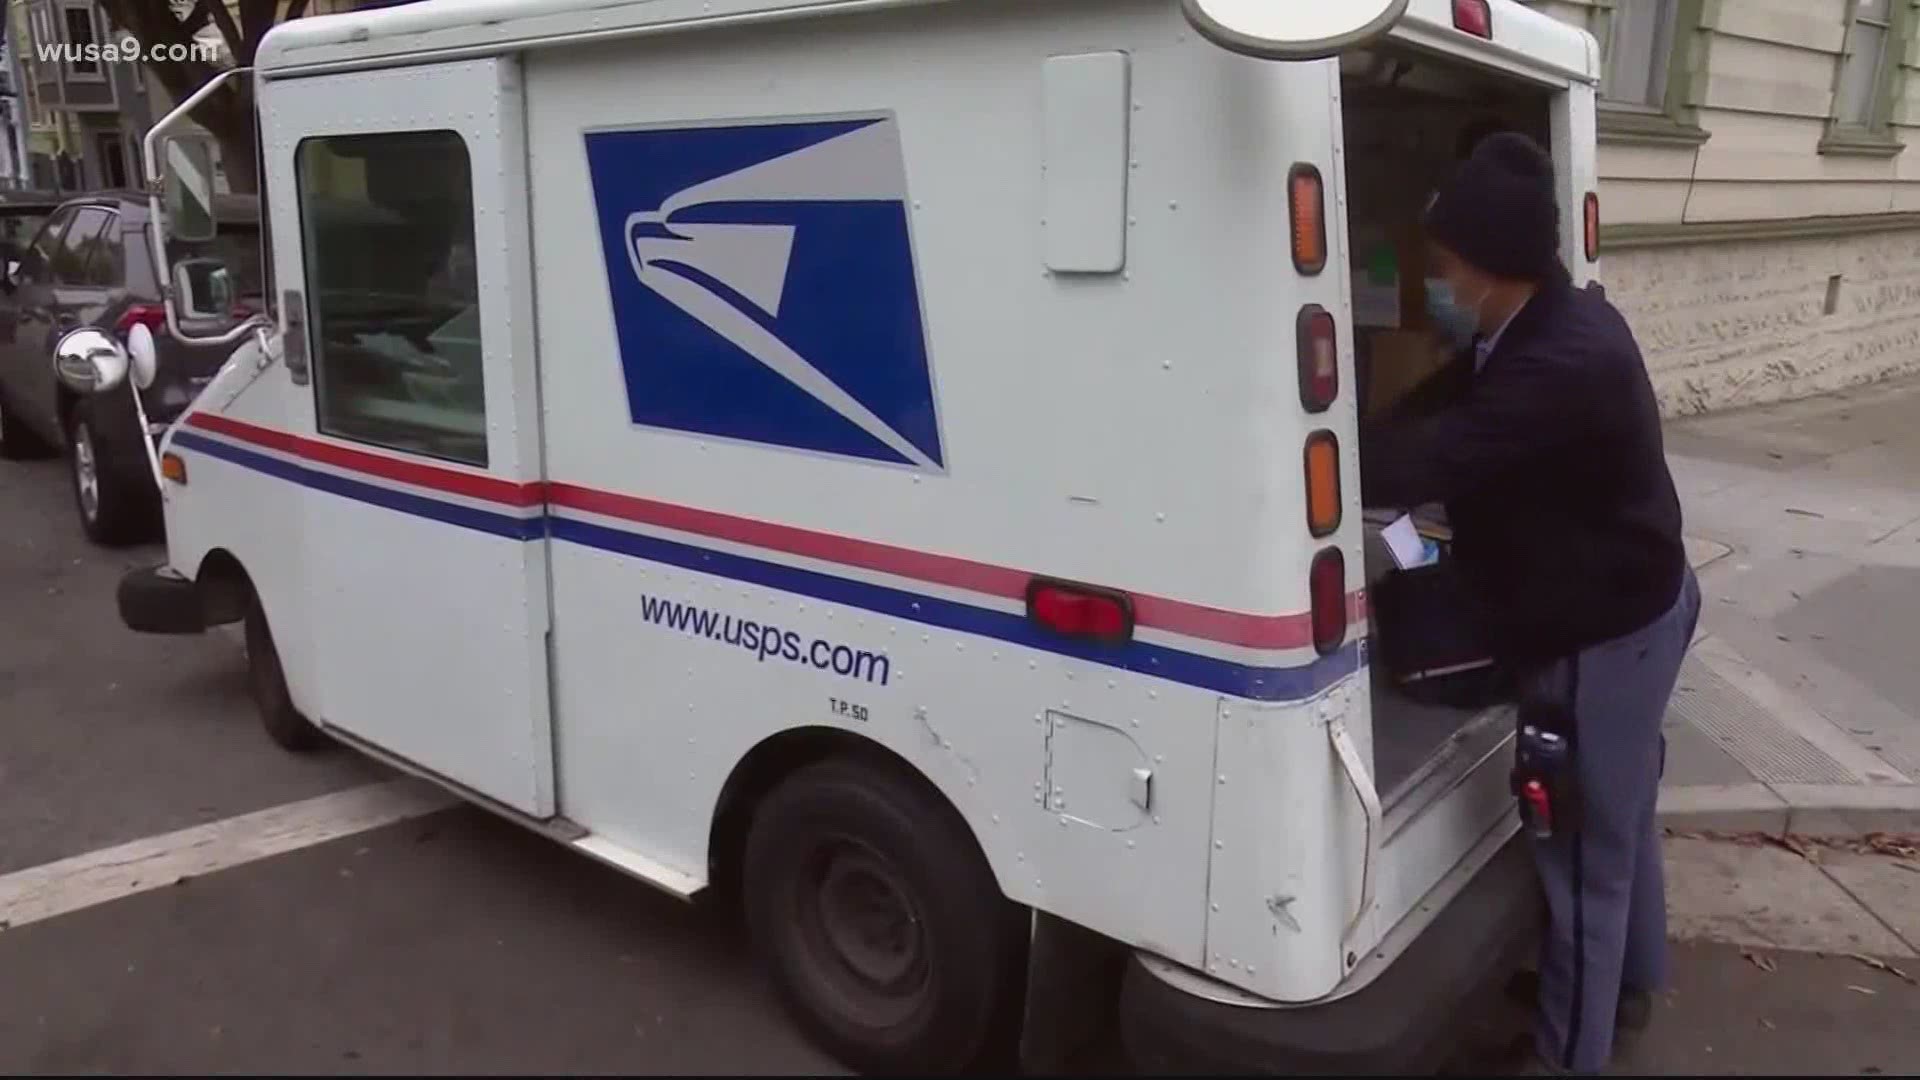 Some residents went to the post office to find their mail while others were left empty-handed.